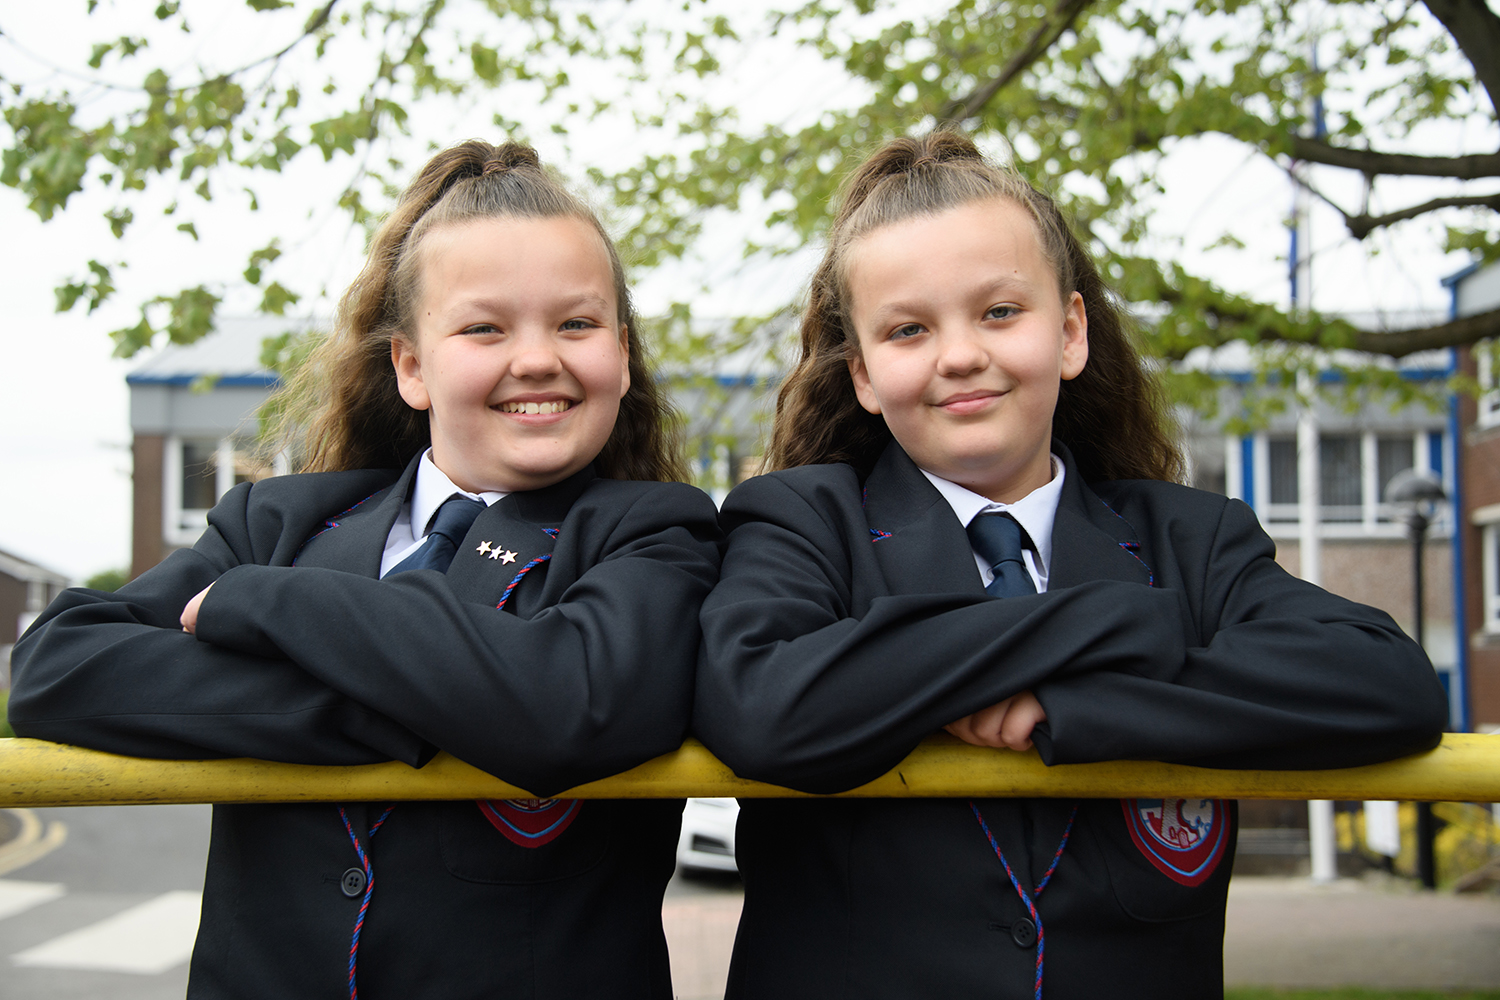 Twin girl students leaning on pole smiling at camera